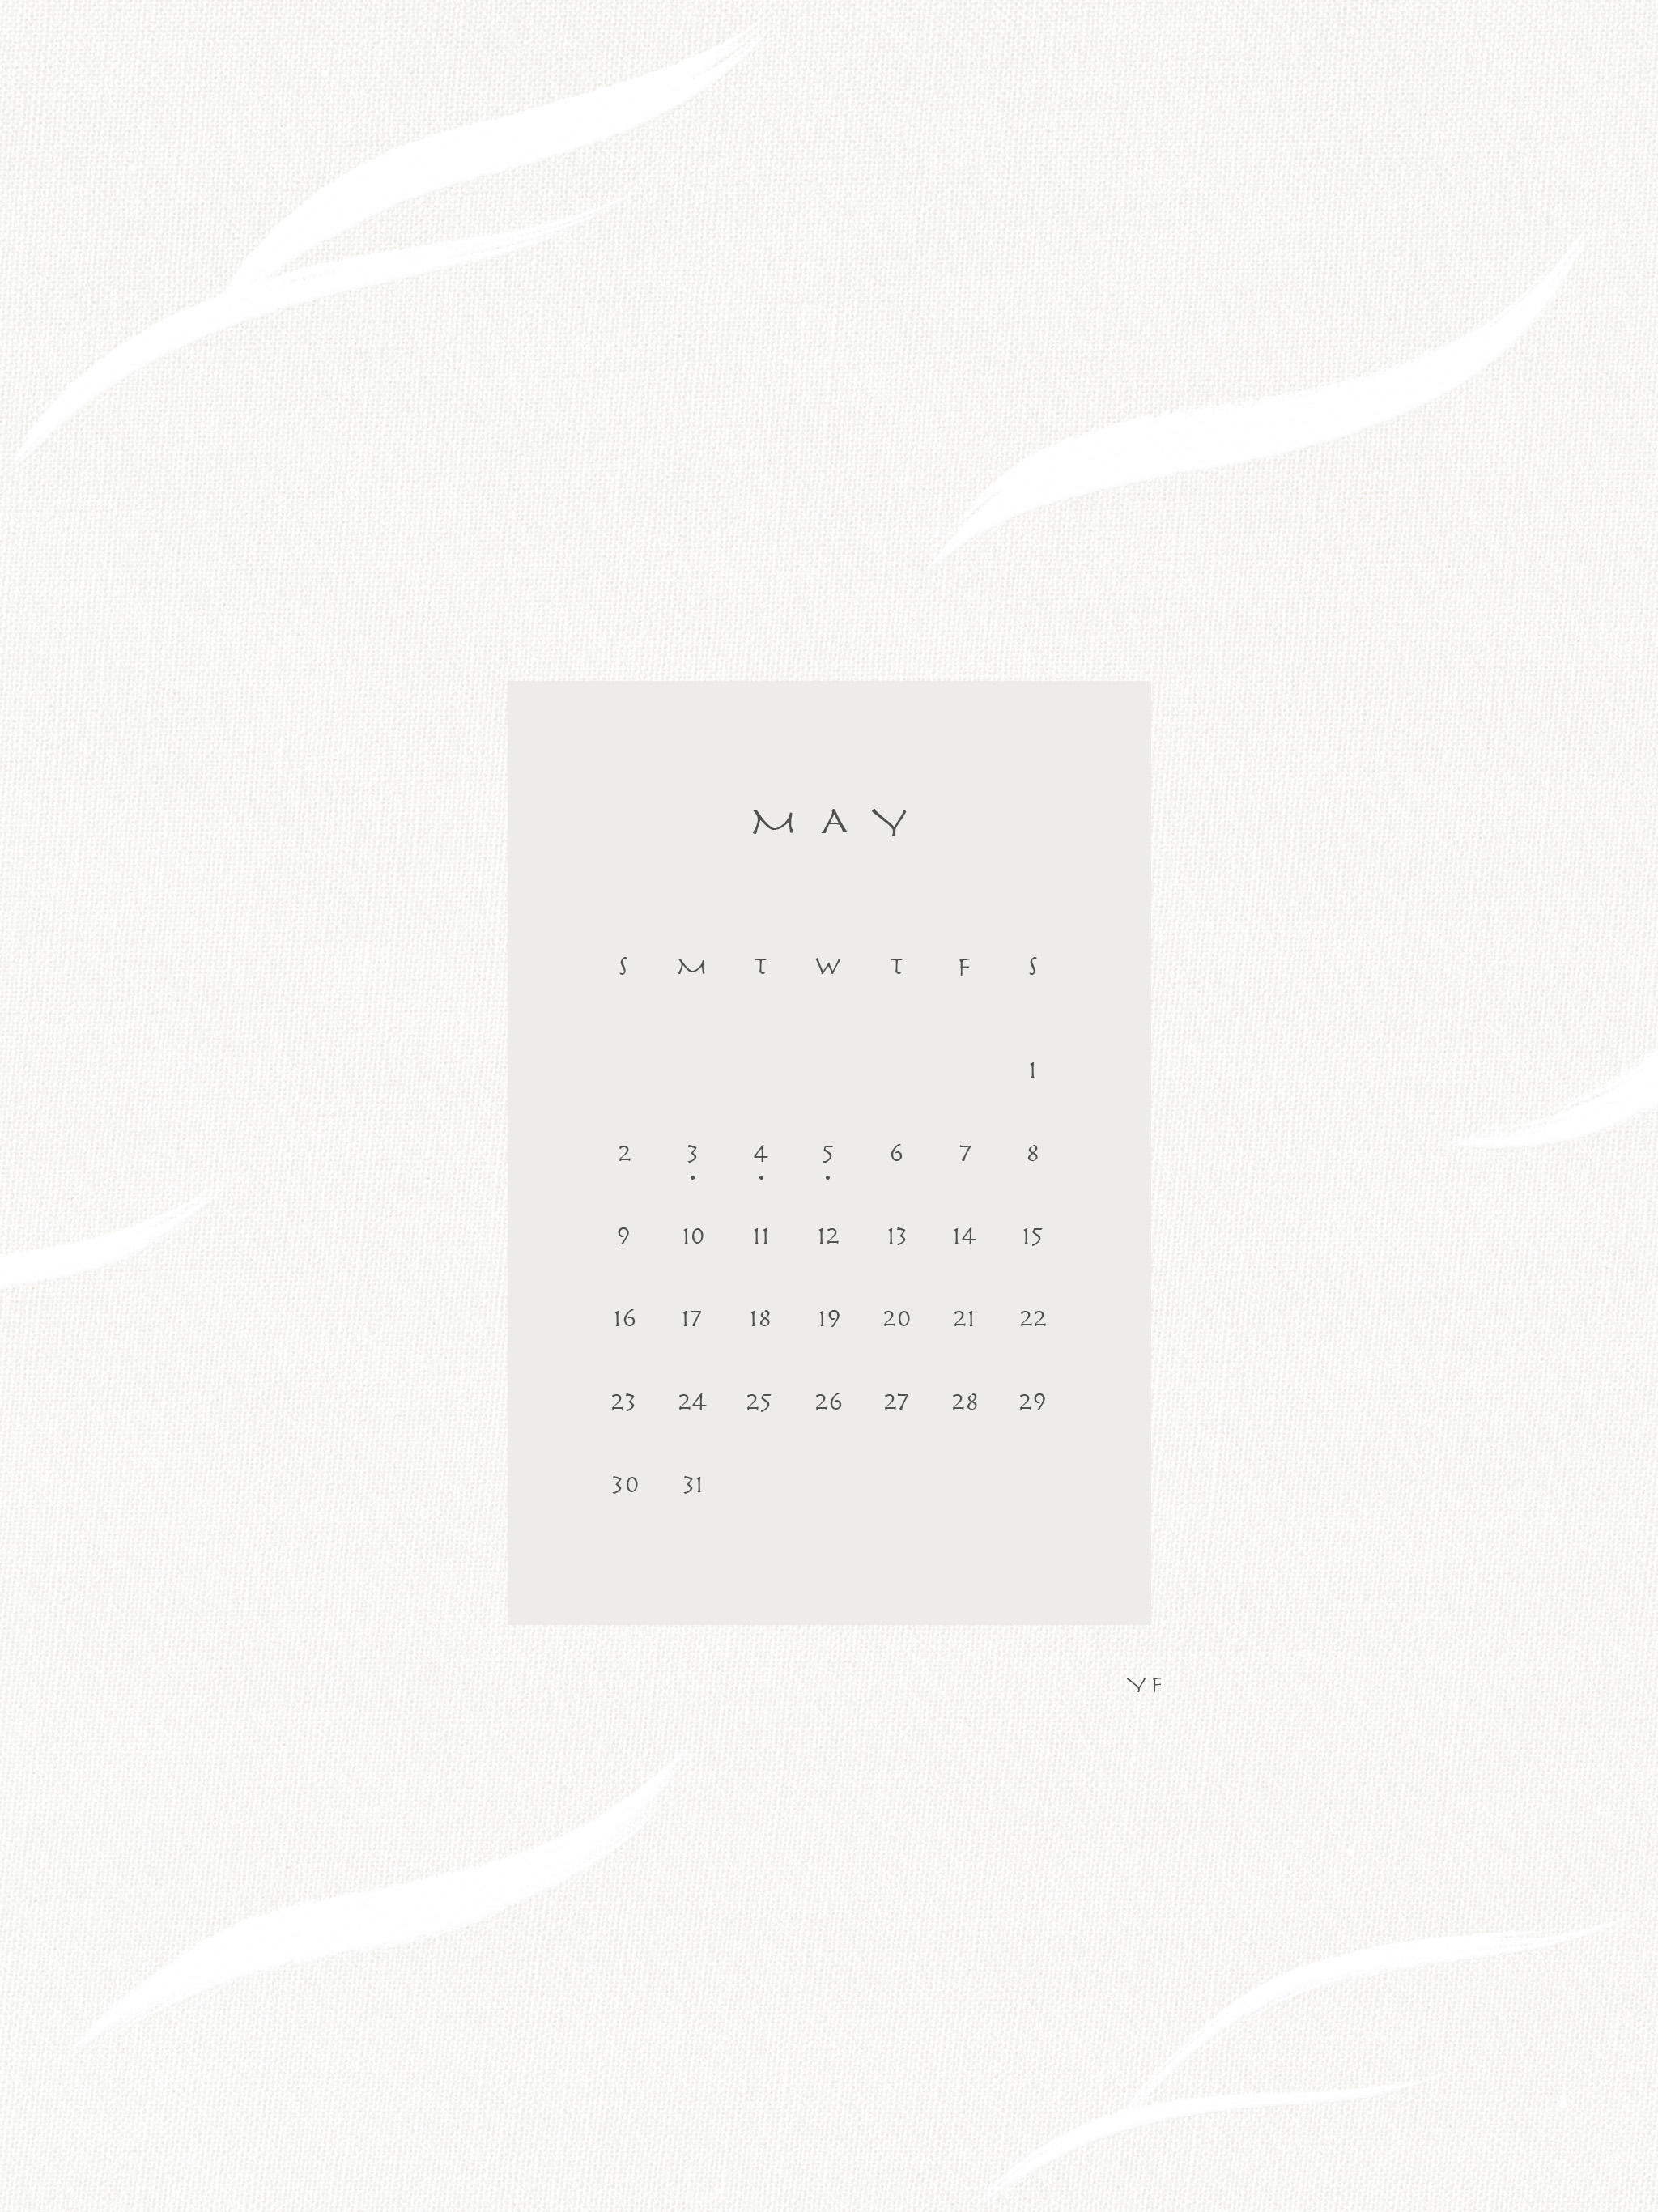 May 21 Calendar Wallpaper For The Ipad Design By Yf